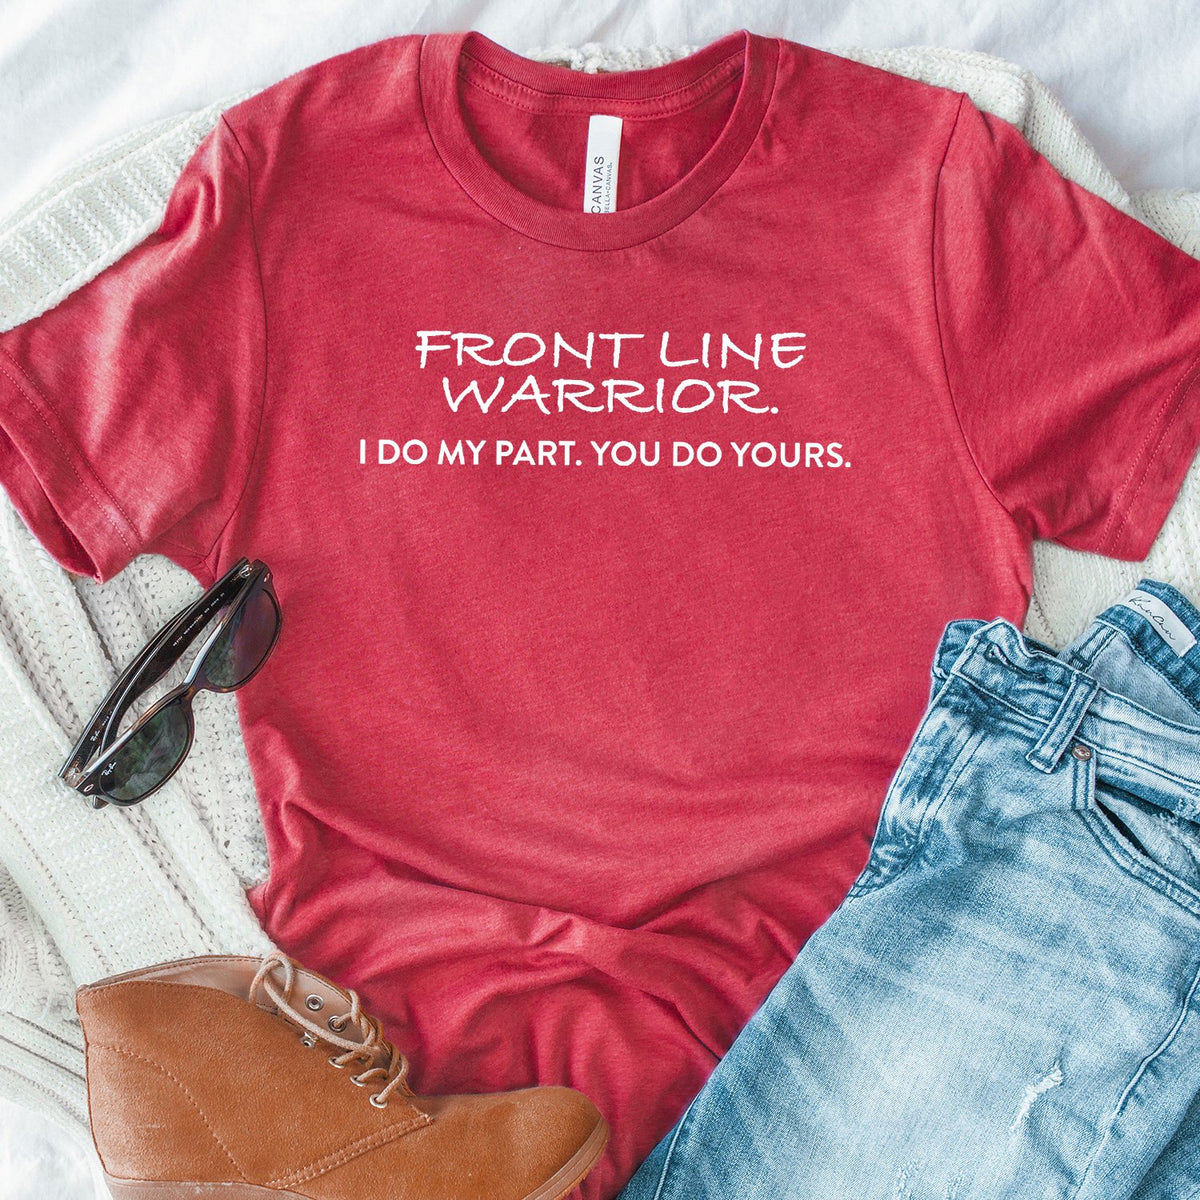 Frontline Warrior I Do My Part You Do Yours - Short Sleeve Tee Shirt